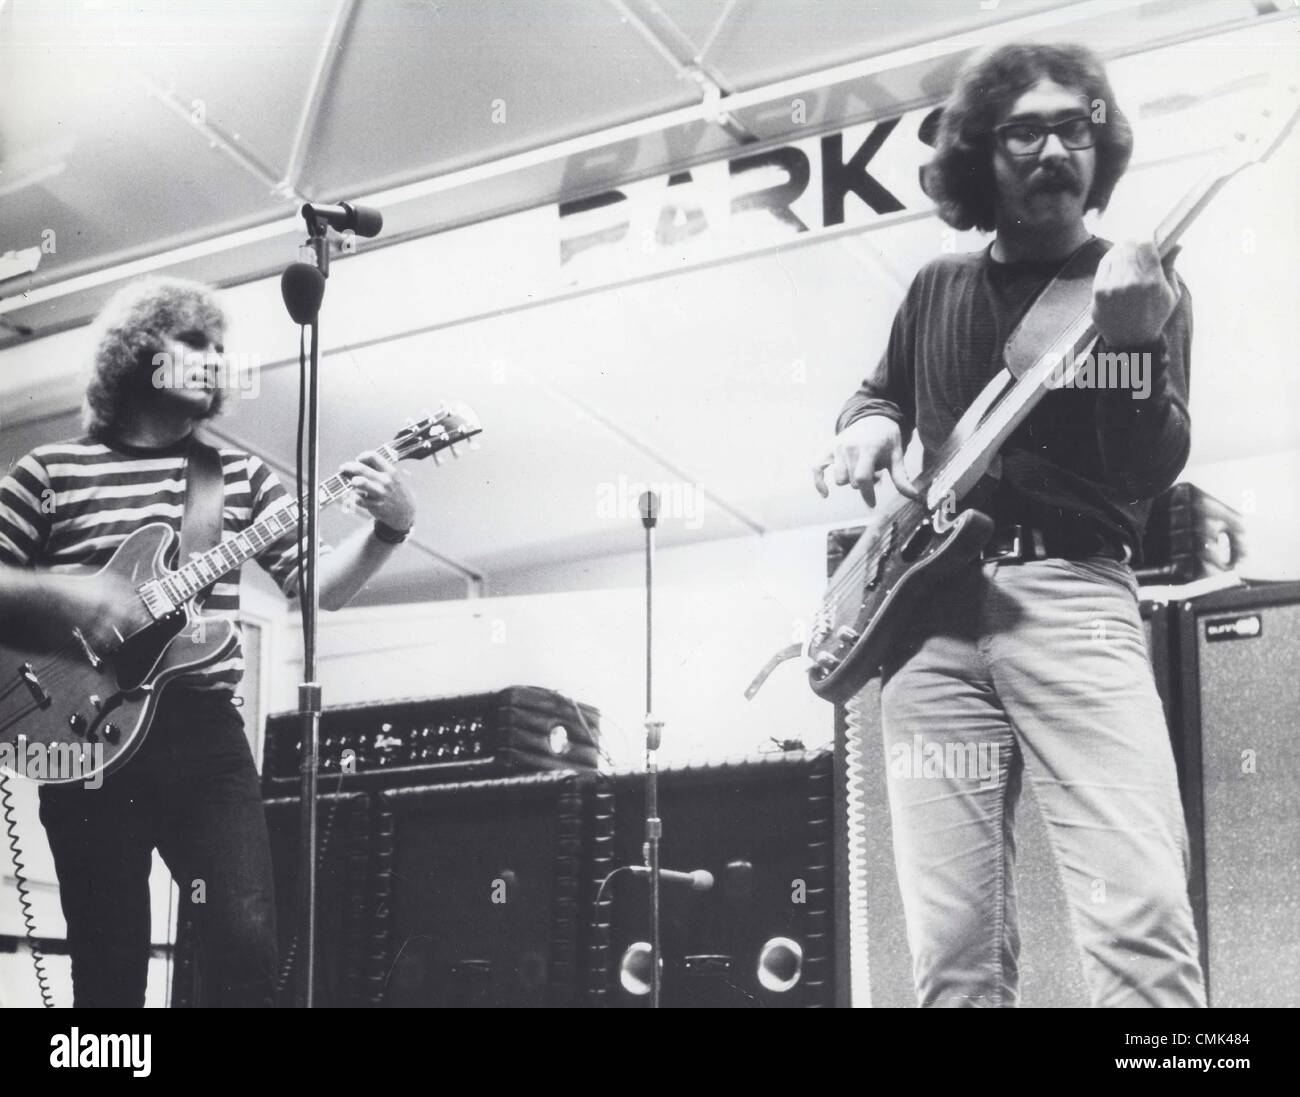 Creedence Clearwater Revival High Resolution Stock Photography and ...